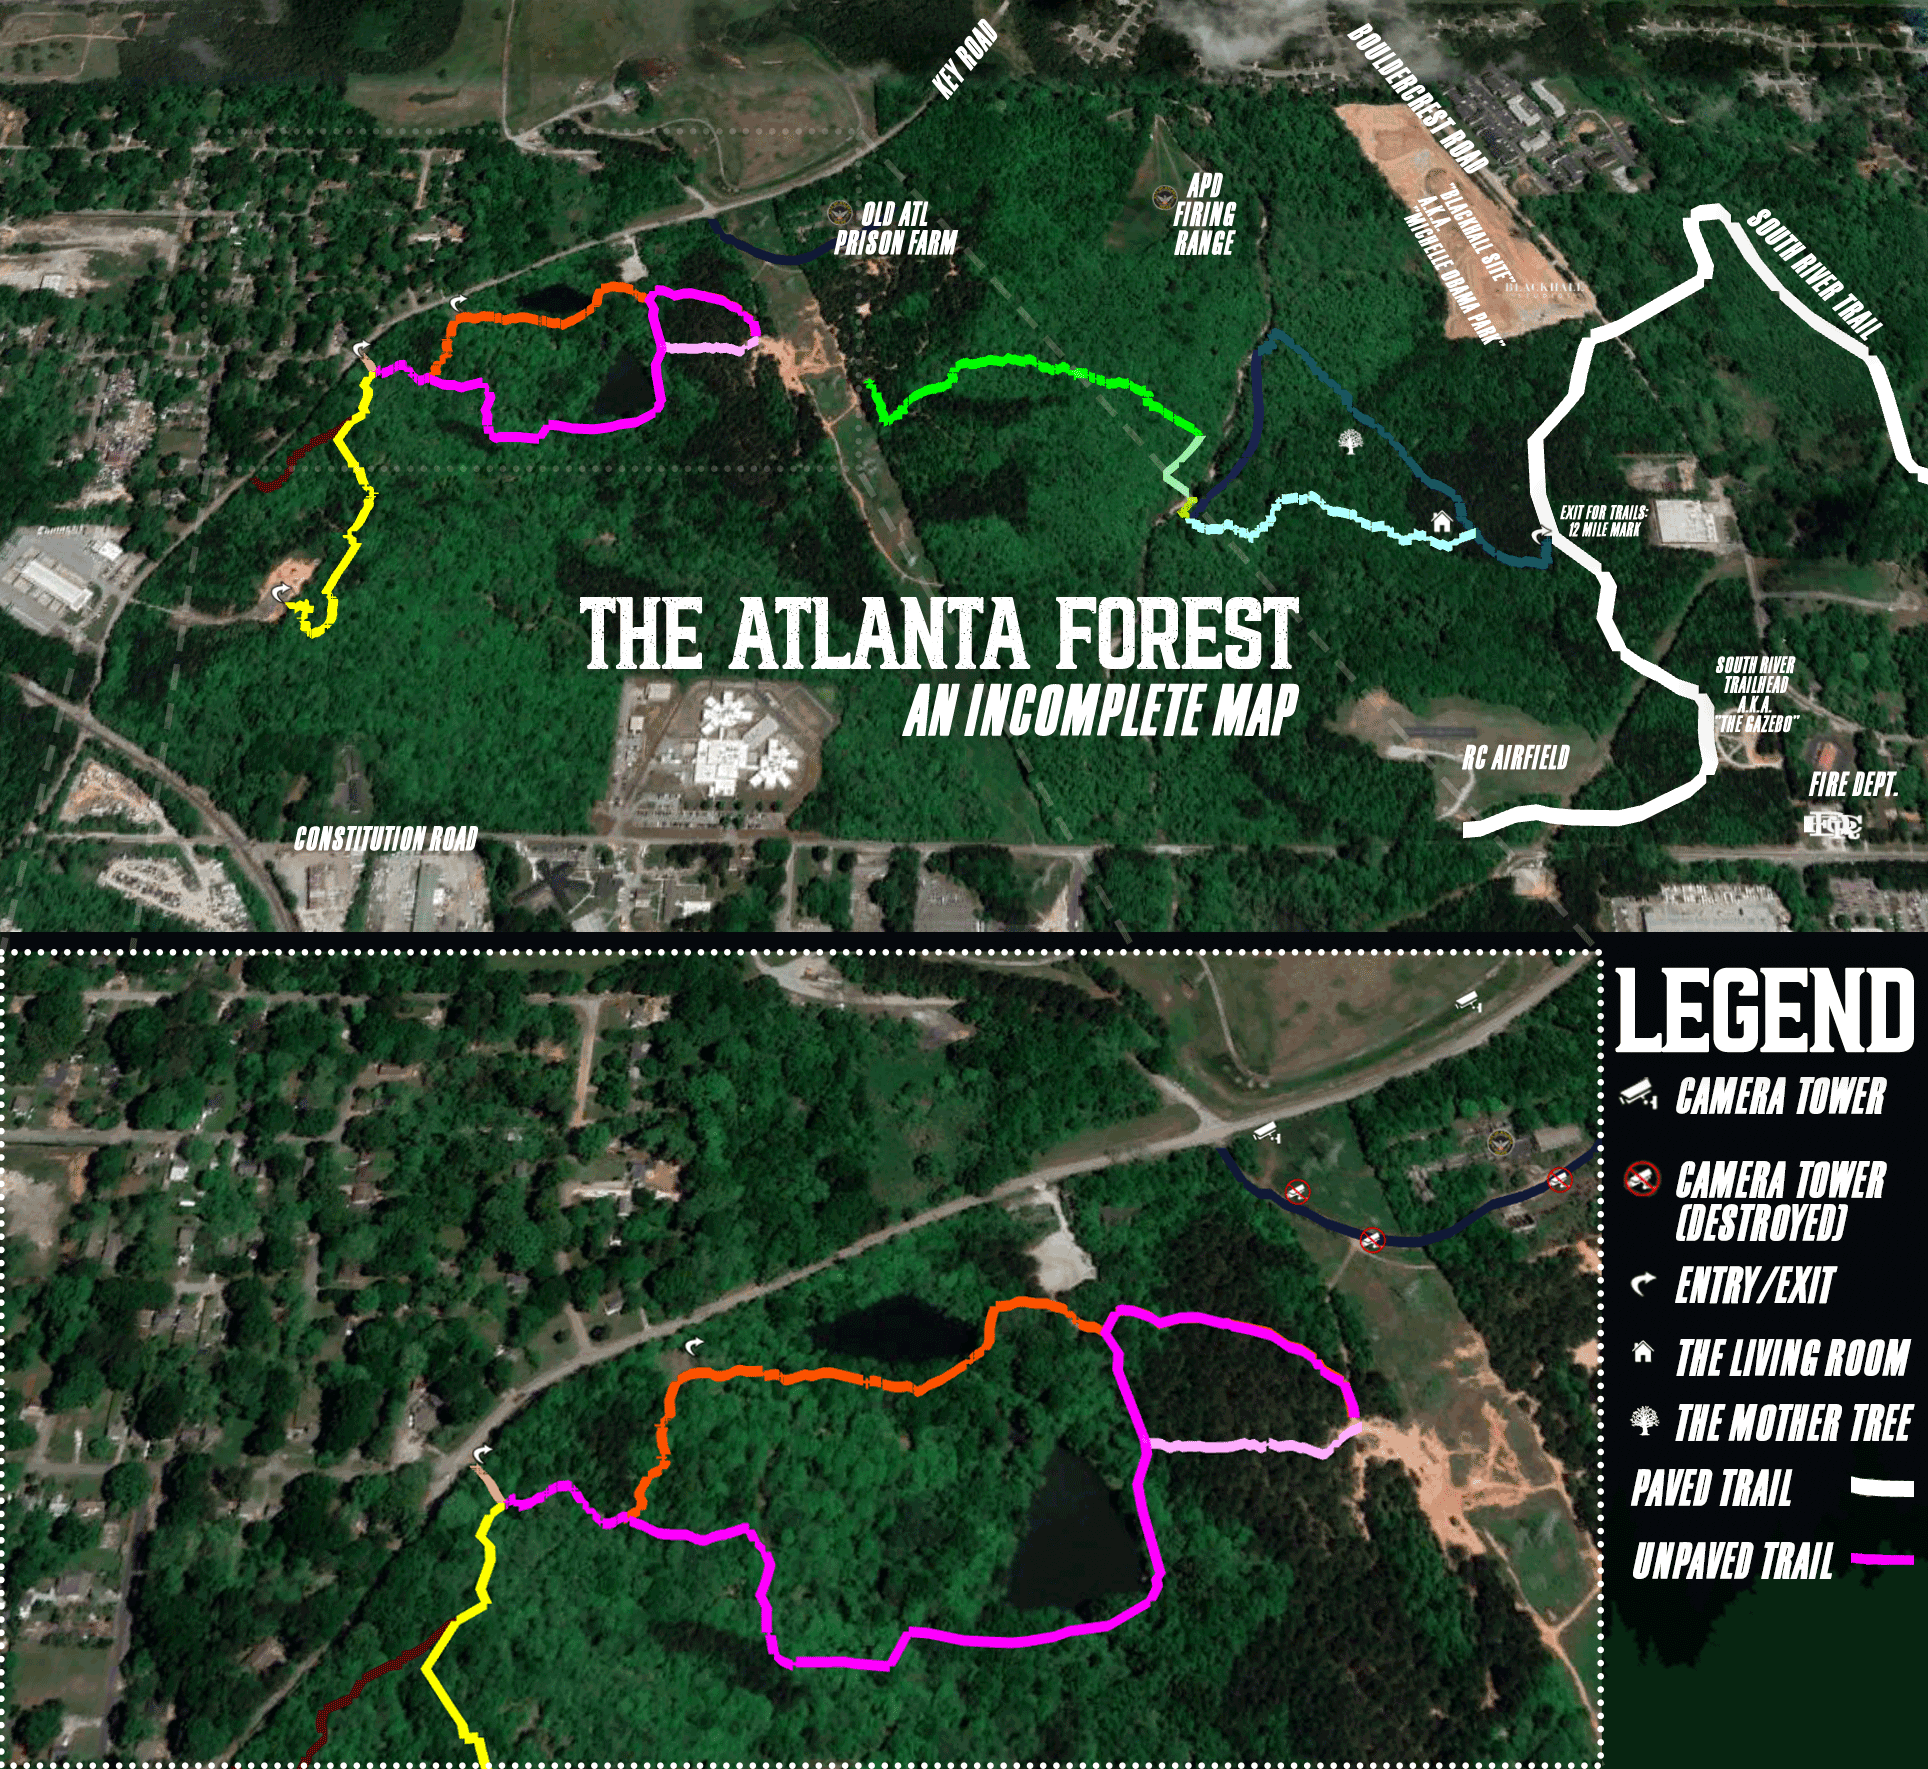 Map of the tract of forest bounded by Constitution, Key, and Bouldercrest roads.